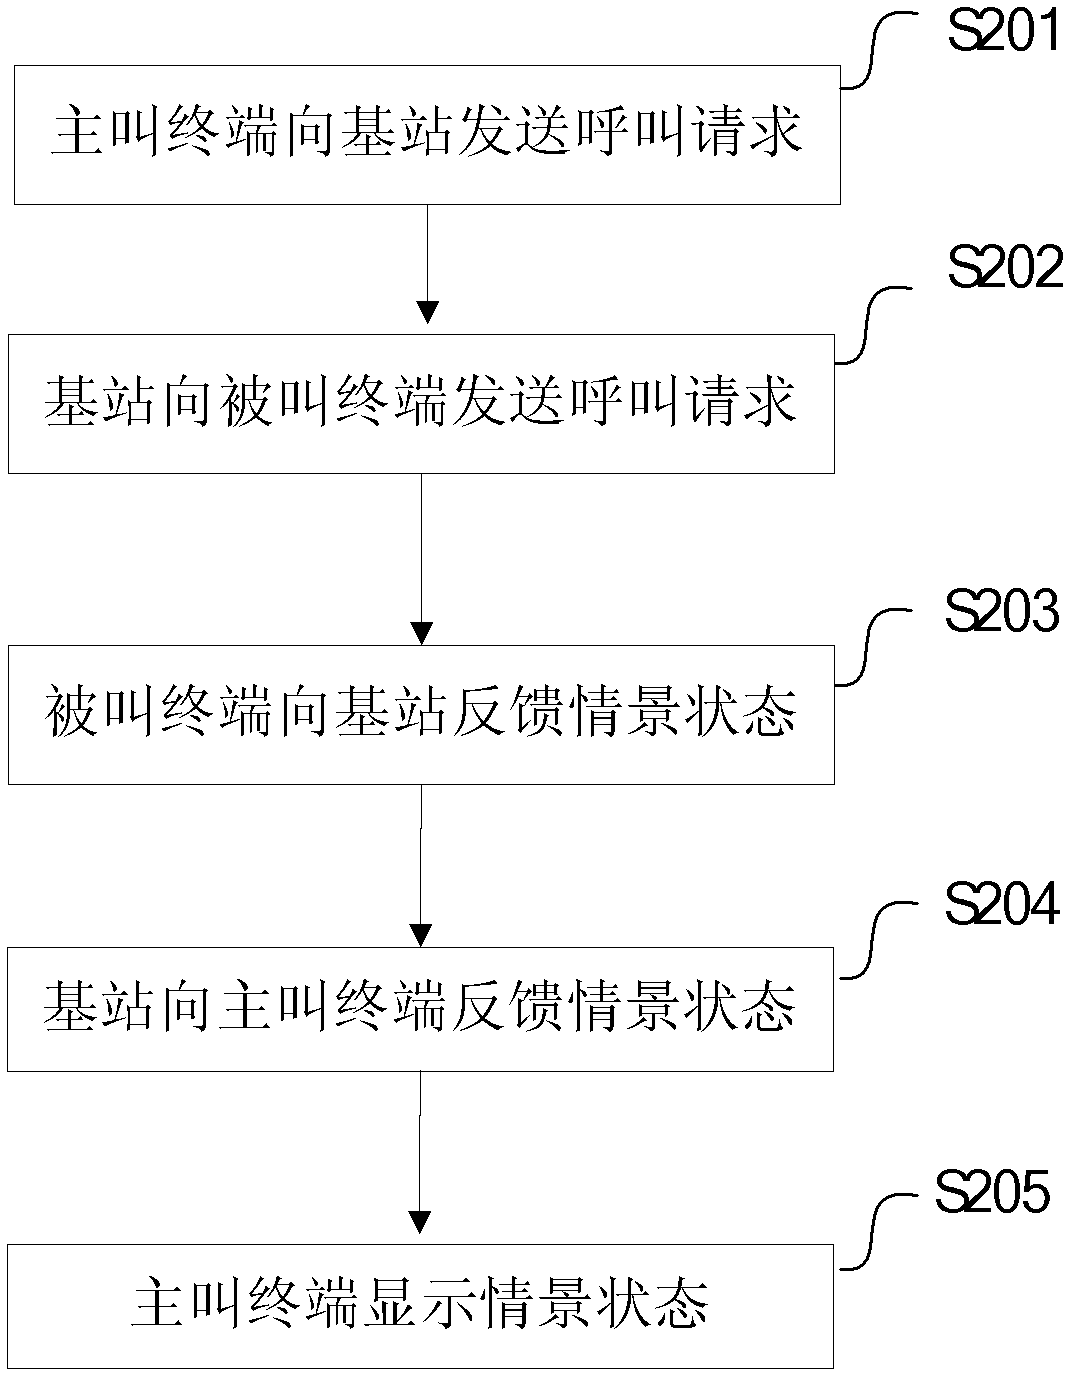 Profile state feedback method, profile state display method and mobile terminals